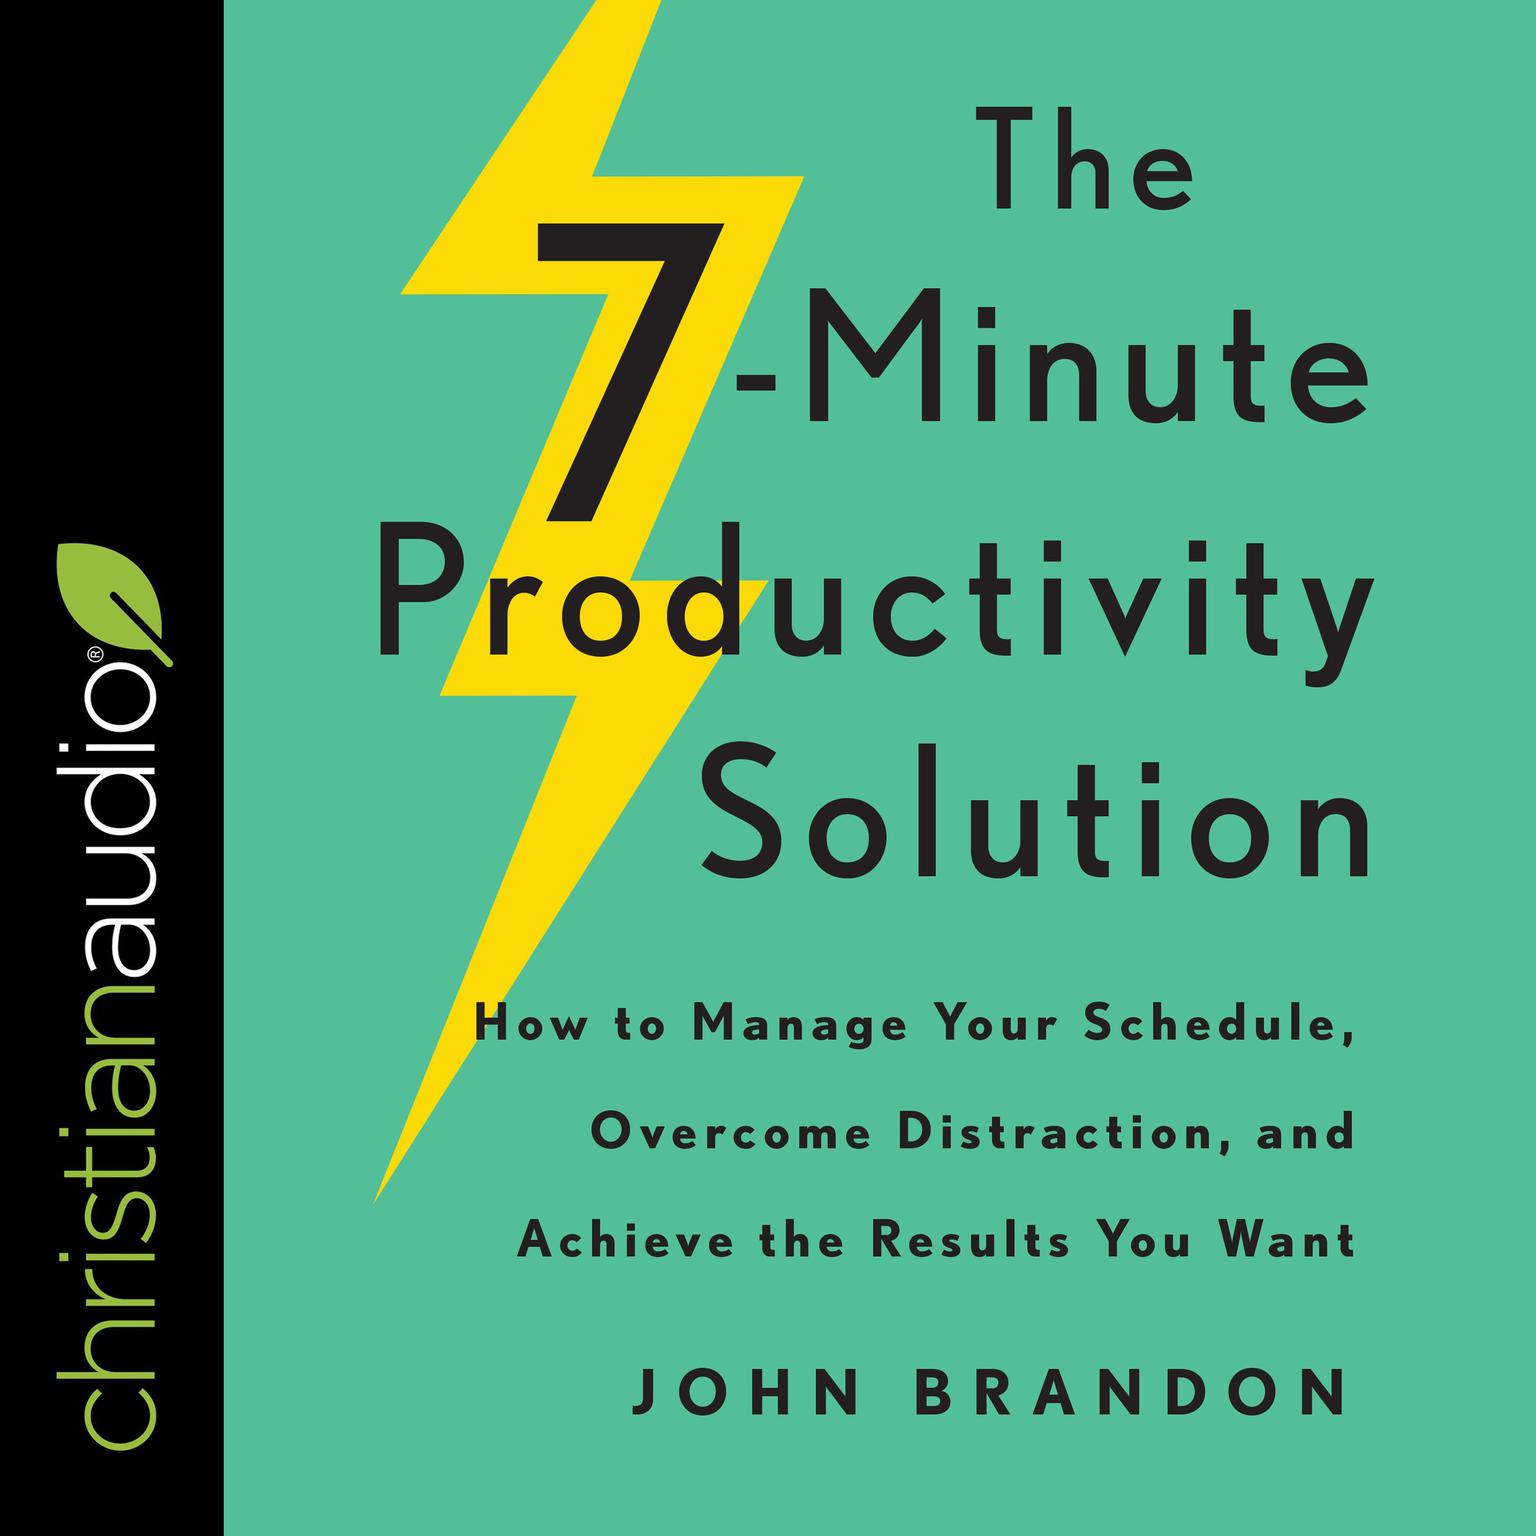 The 7-Minute Productivity Solution: How to Manage Your Schedule, Overcome Distraction, and Achieve the Results You Want Audiobook, by John Brandon